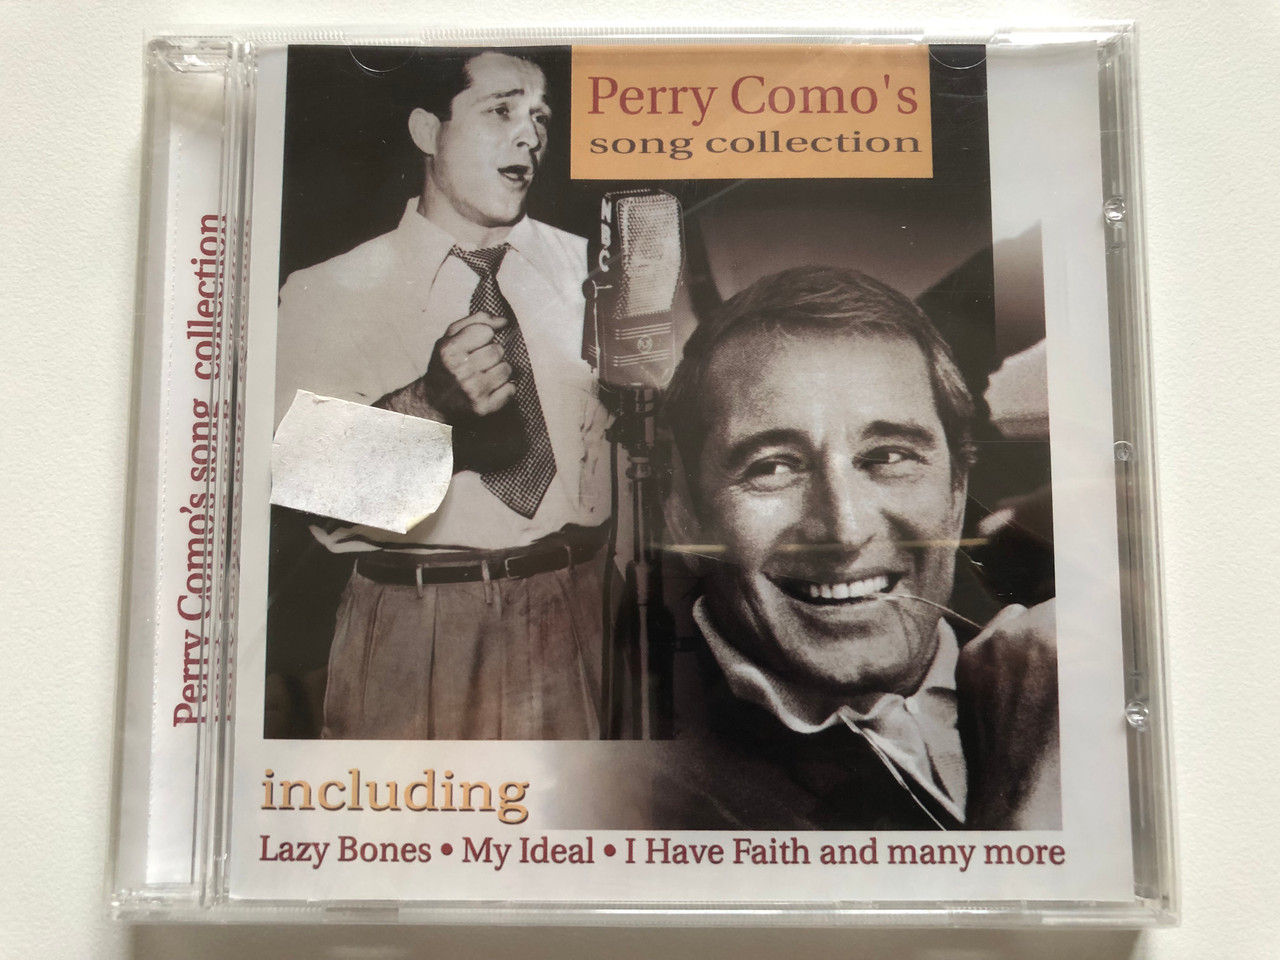 https://cdn10.bigcommerce.com/s-62bdpkt7pb/products/0/images/221171/Perry_Comos_Song_Collection_Including_Lazy_Bones_My_Ideal_I_Have_Faith_and_many_more_Going_For_A_Song_Audio_CD_GFS284_1__52393.1649412218.1280.1280.JPG?c=2&_gl=1*1p87a8s*_ga*MjA2NTIxMjE2MC4xNTkwNTEyNTMy*_ga_WS2VZYPC6G*MTY0OTQwOTM3NC4zNDkuMS4xNjQ5NDEyMDQ2LjQy